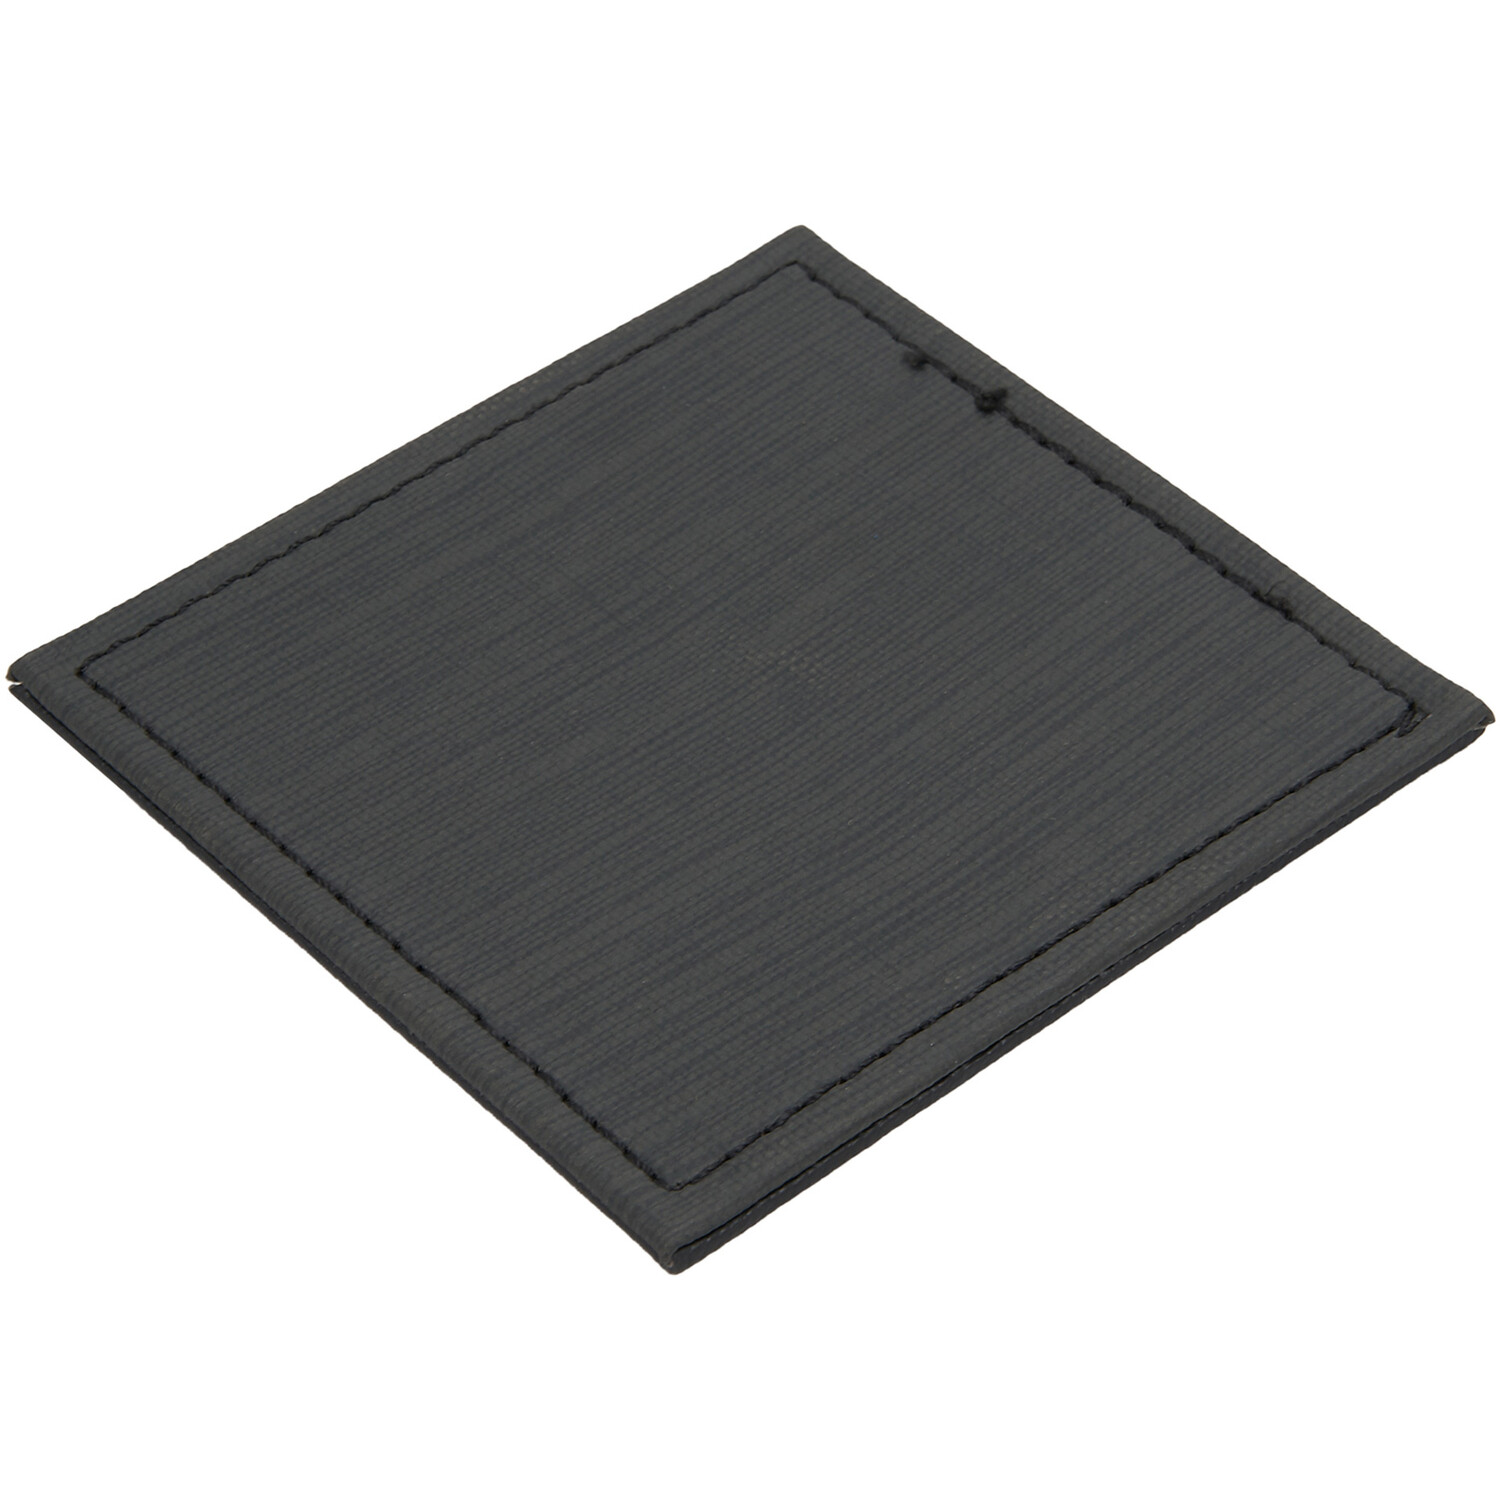 Pack of 4 Linen Texture Coasters - Black Image 3